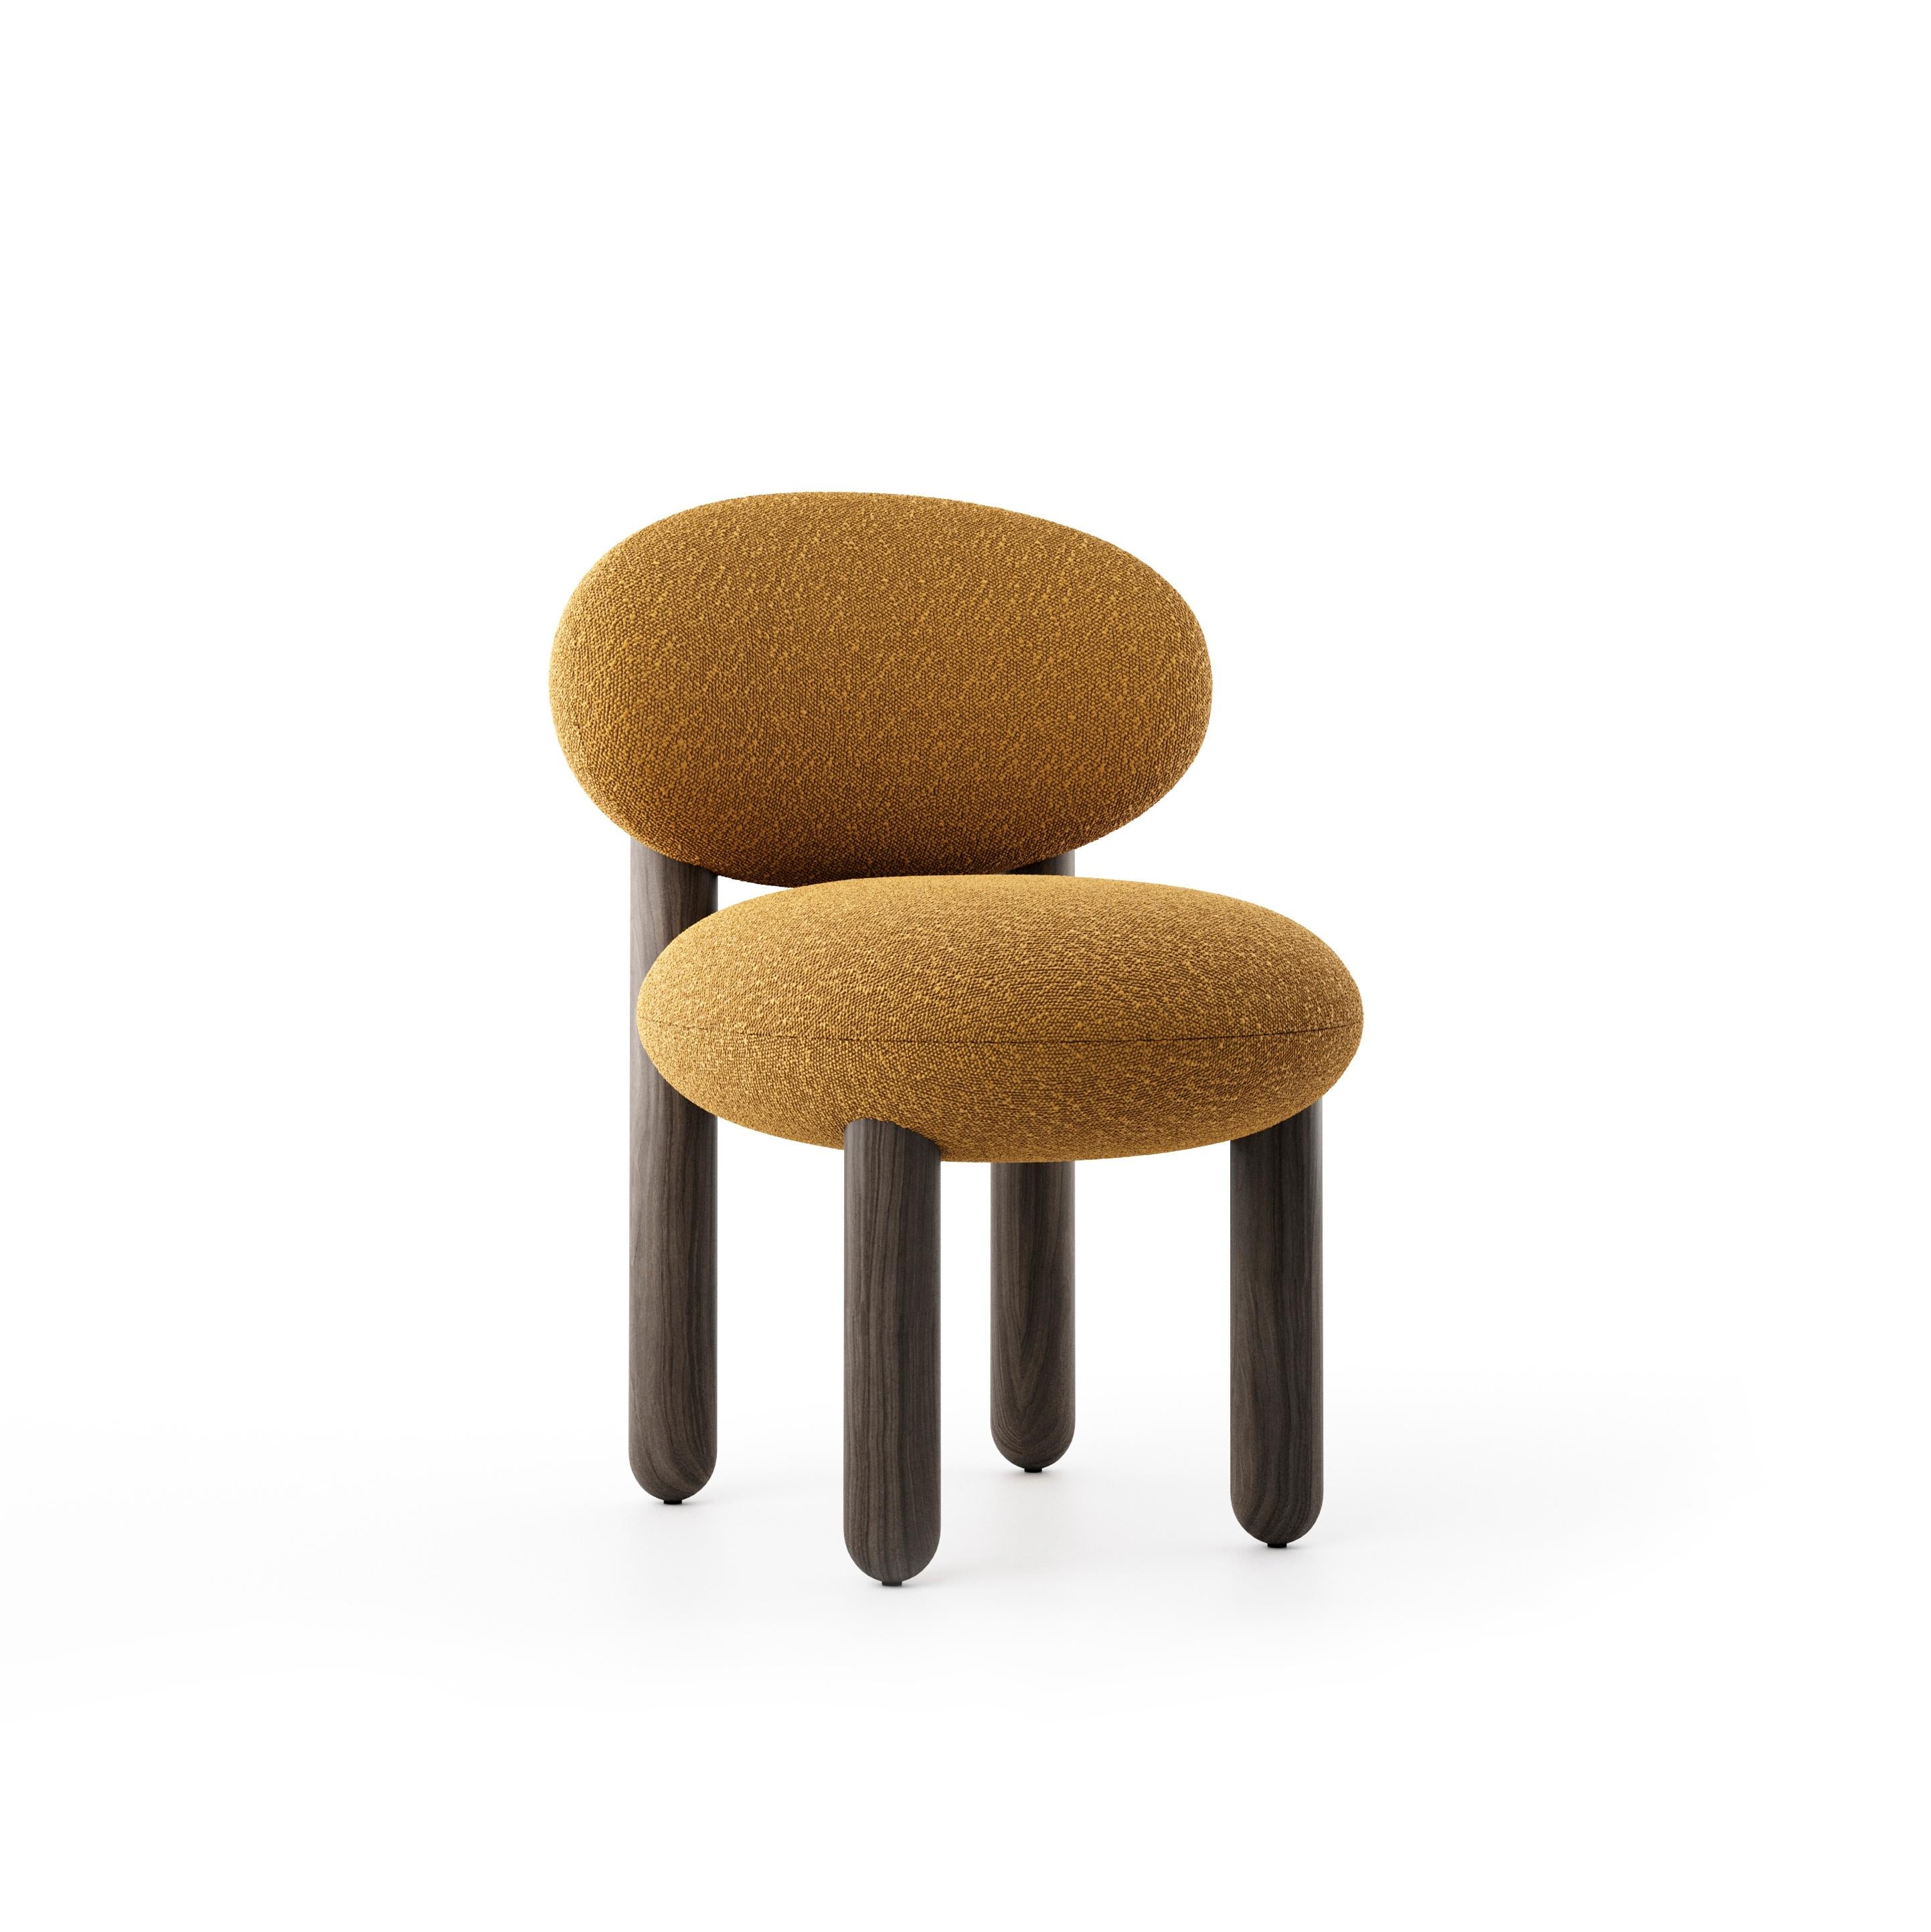 Ukrainian Modern Dining Chair Flock CS2 with Wooden Legs in Various Fabrics by Noom